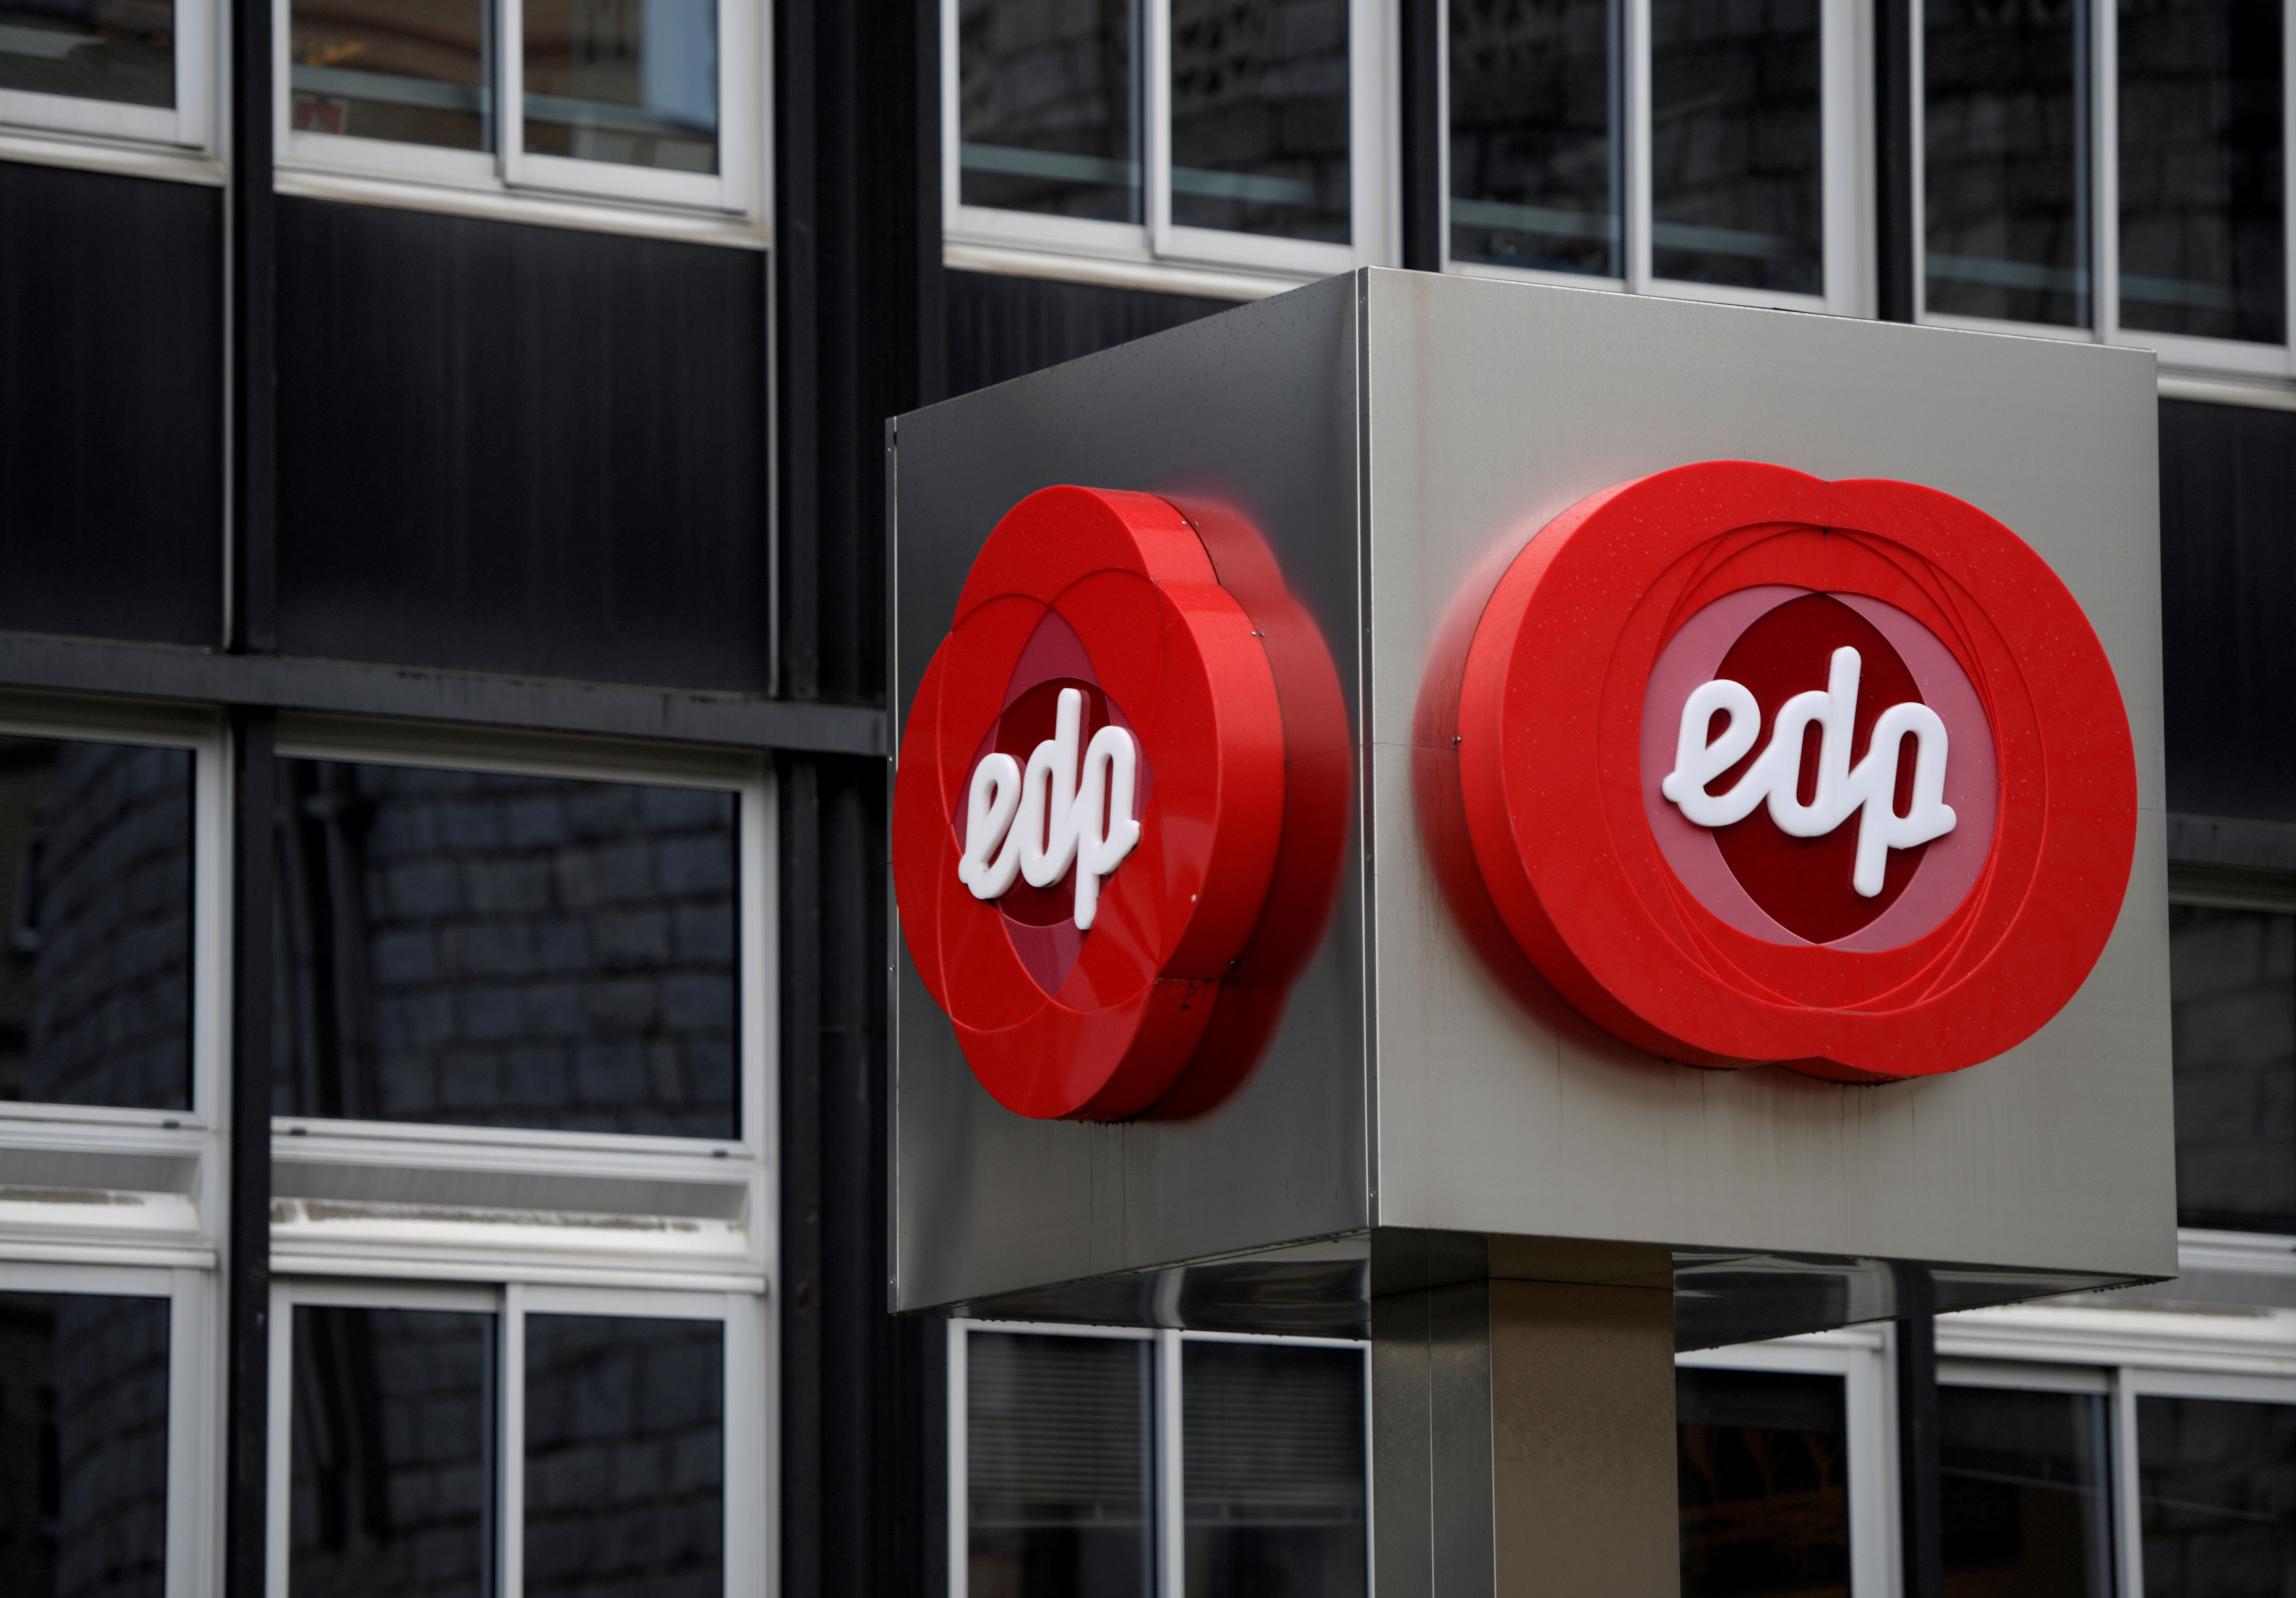 The logo of Portuguese utility company EDP - Energias de Portugal is seen at the company's offices in Oviedo